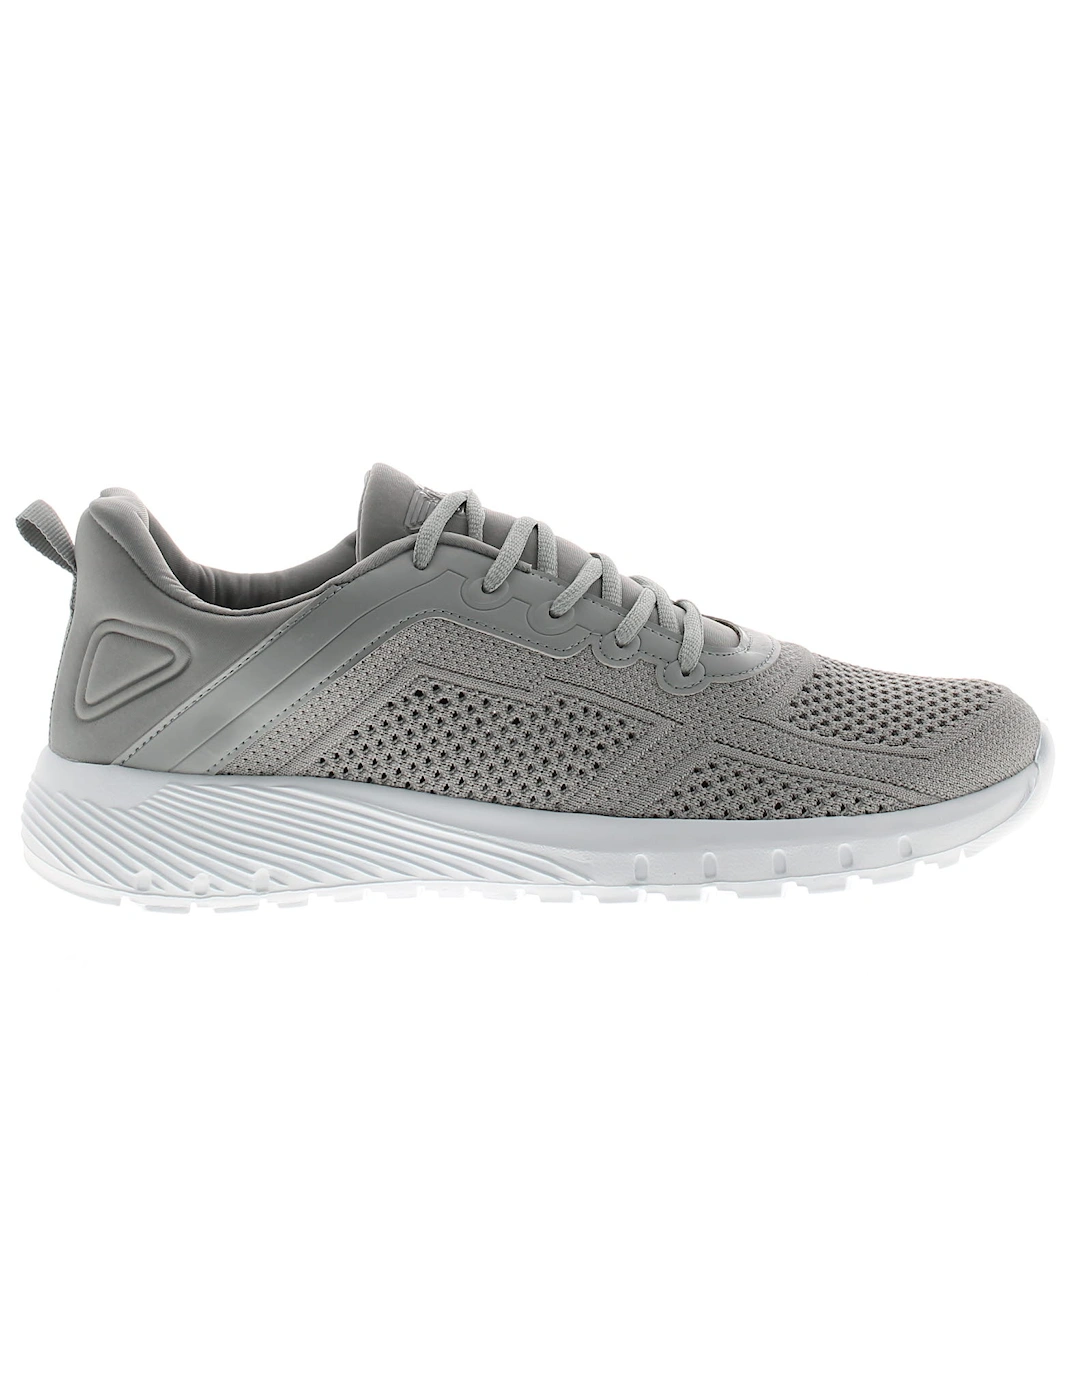 Mens Trainers Lace Up Rivers Lightweight Mesh Upper Grey UK Size